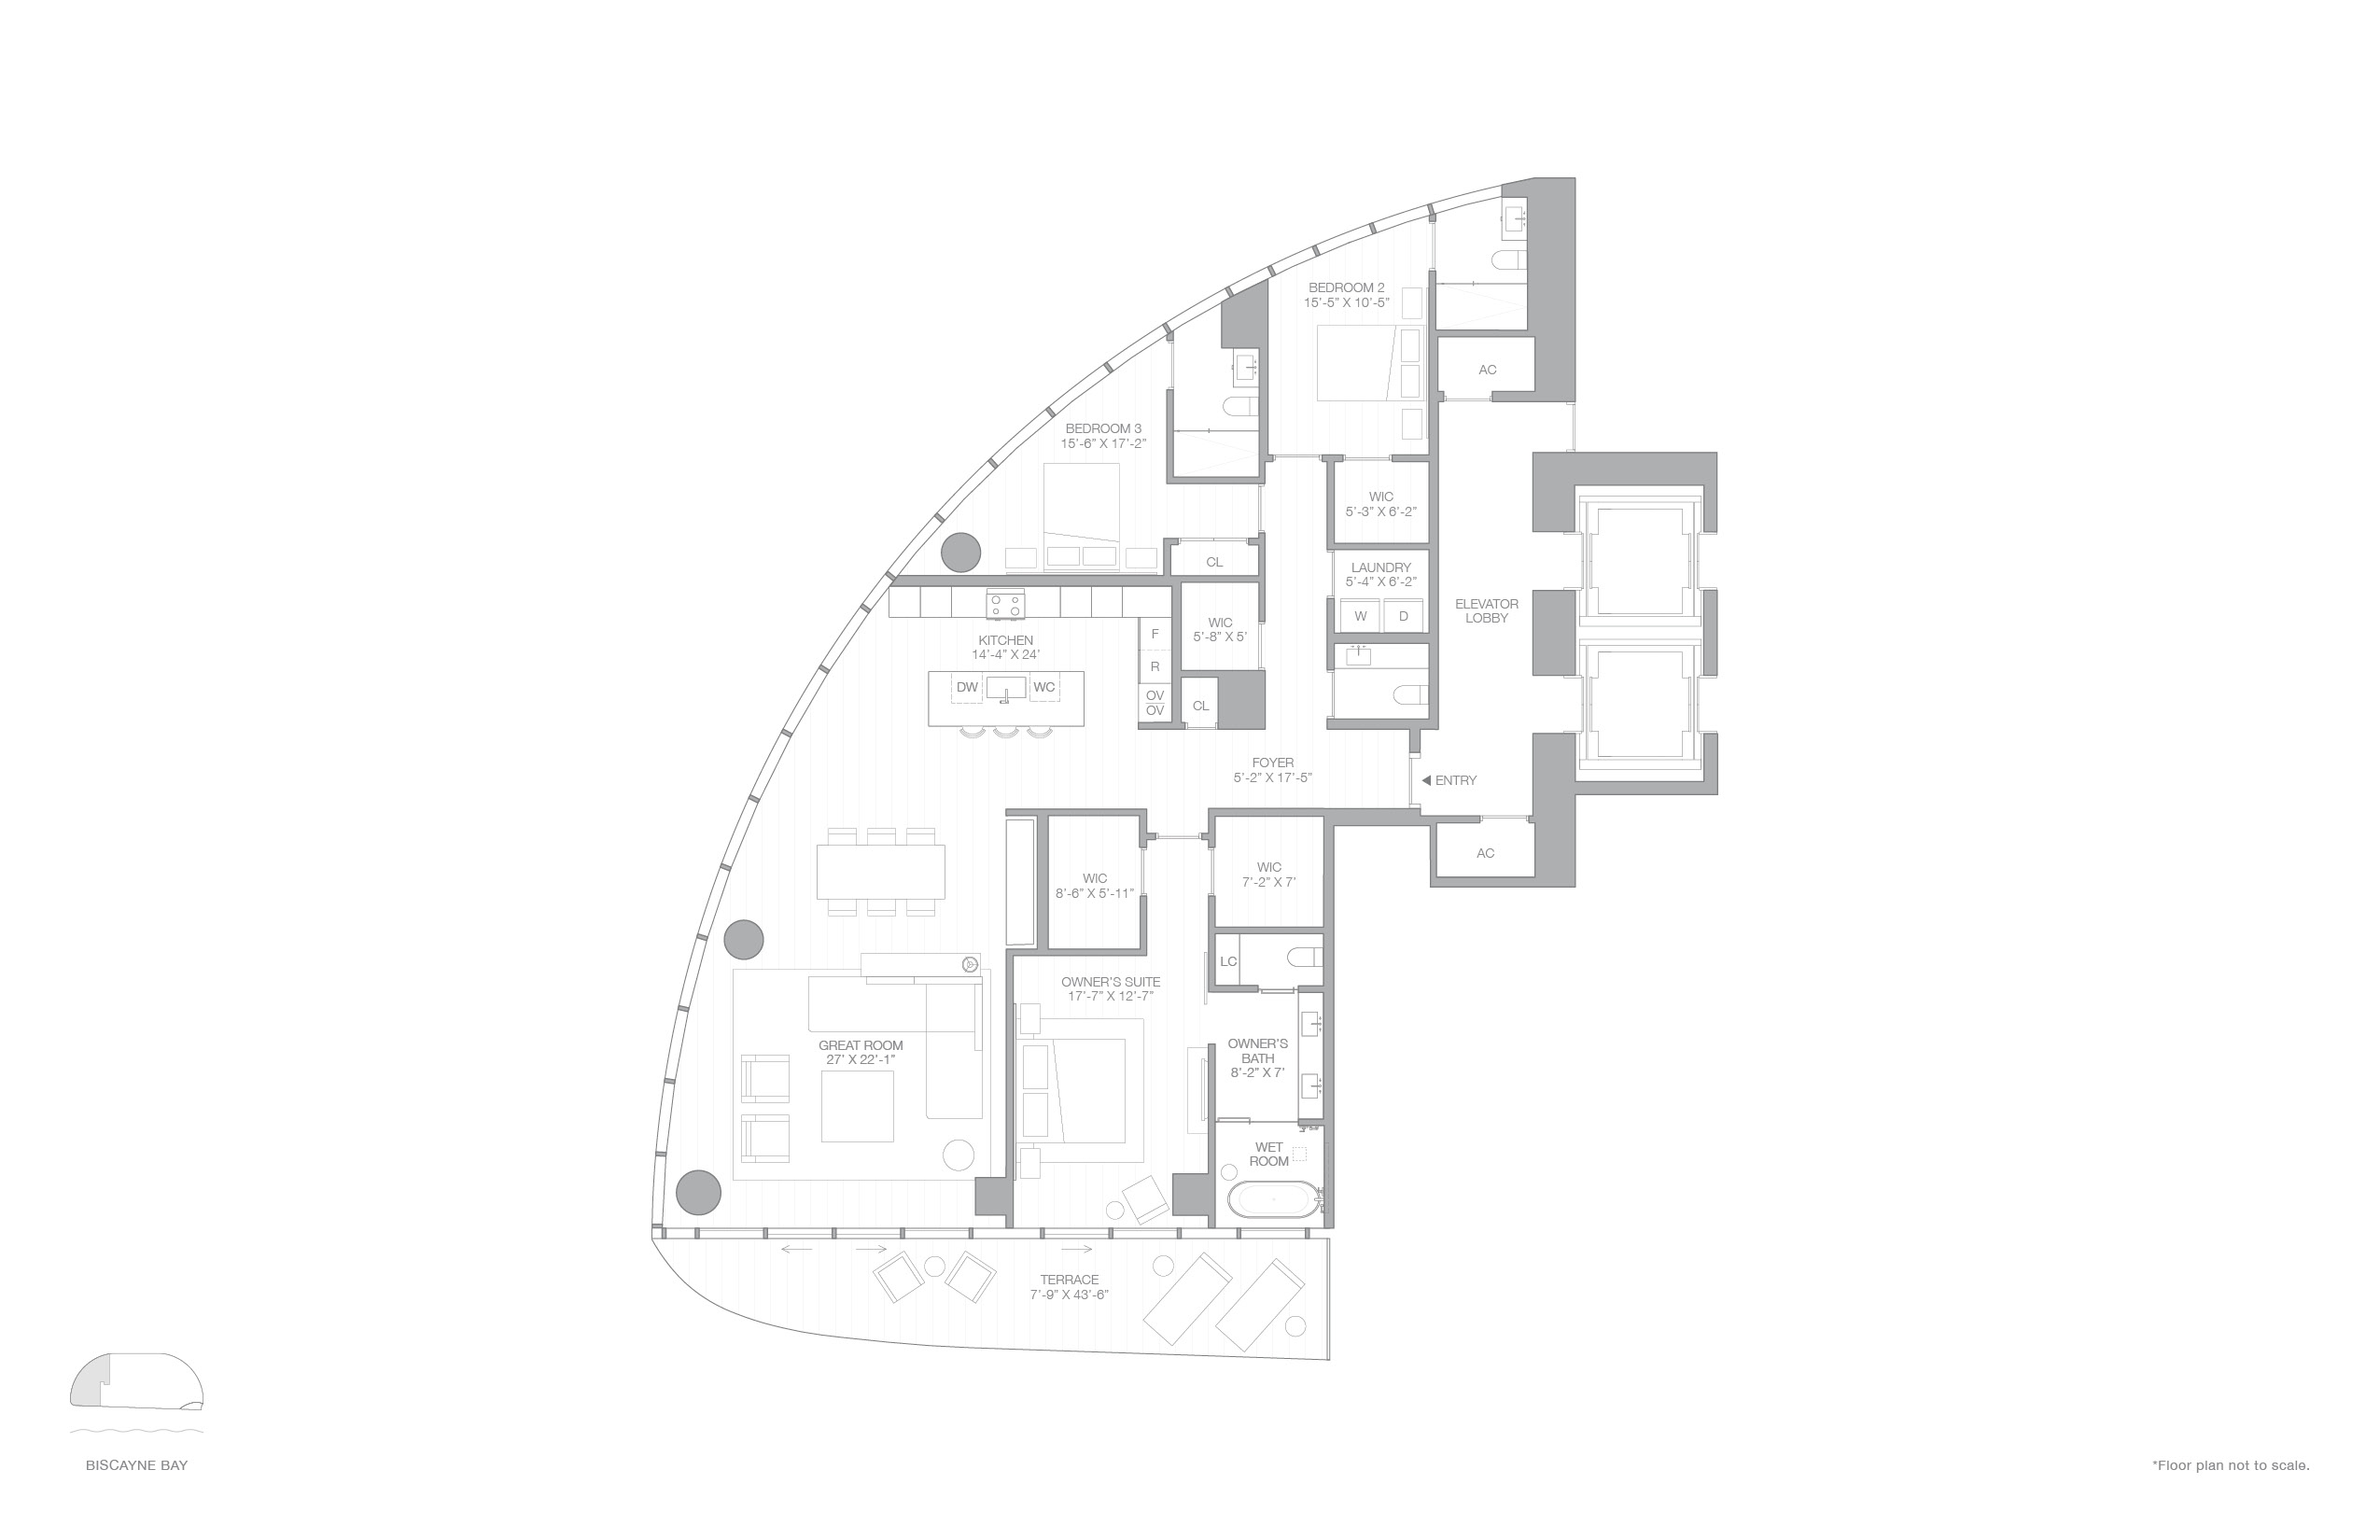 Blueprint map of the residence area